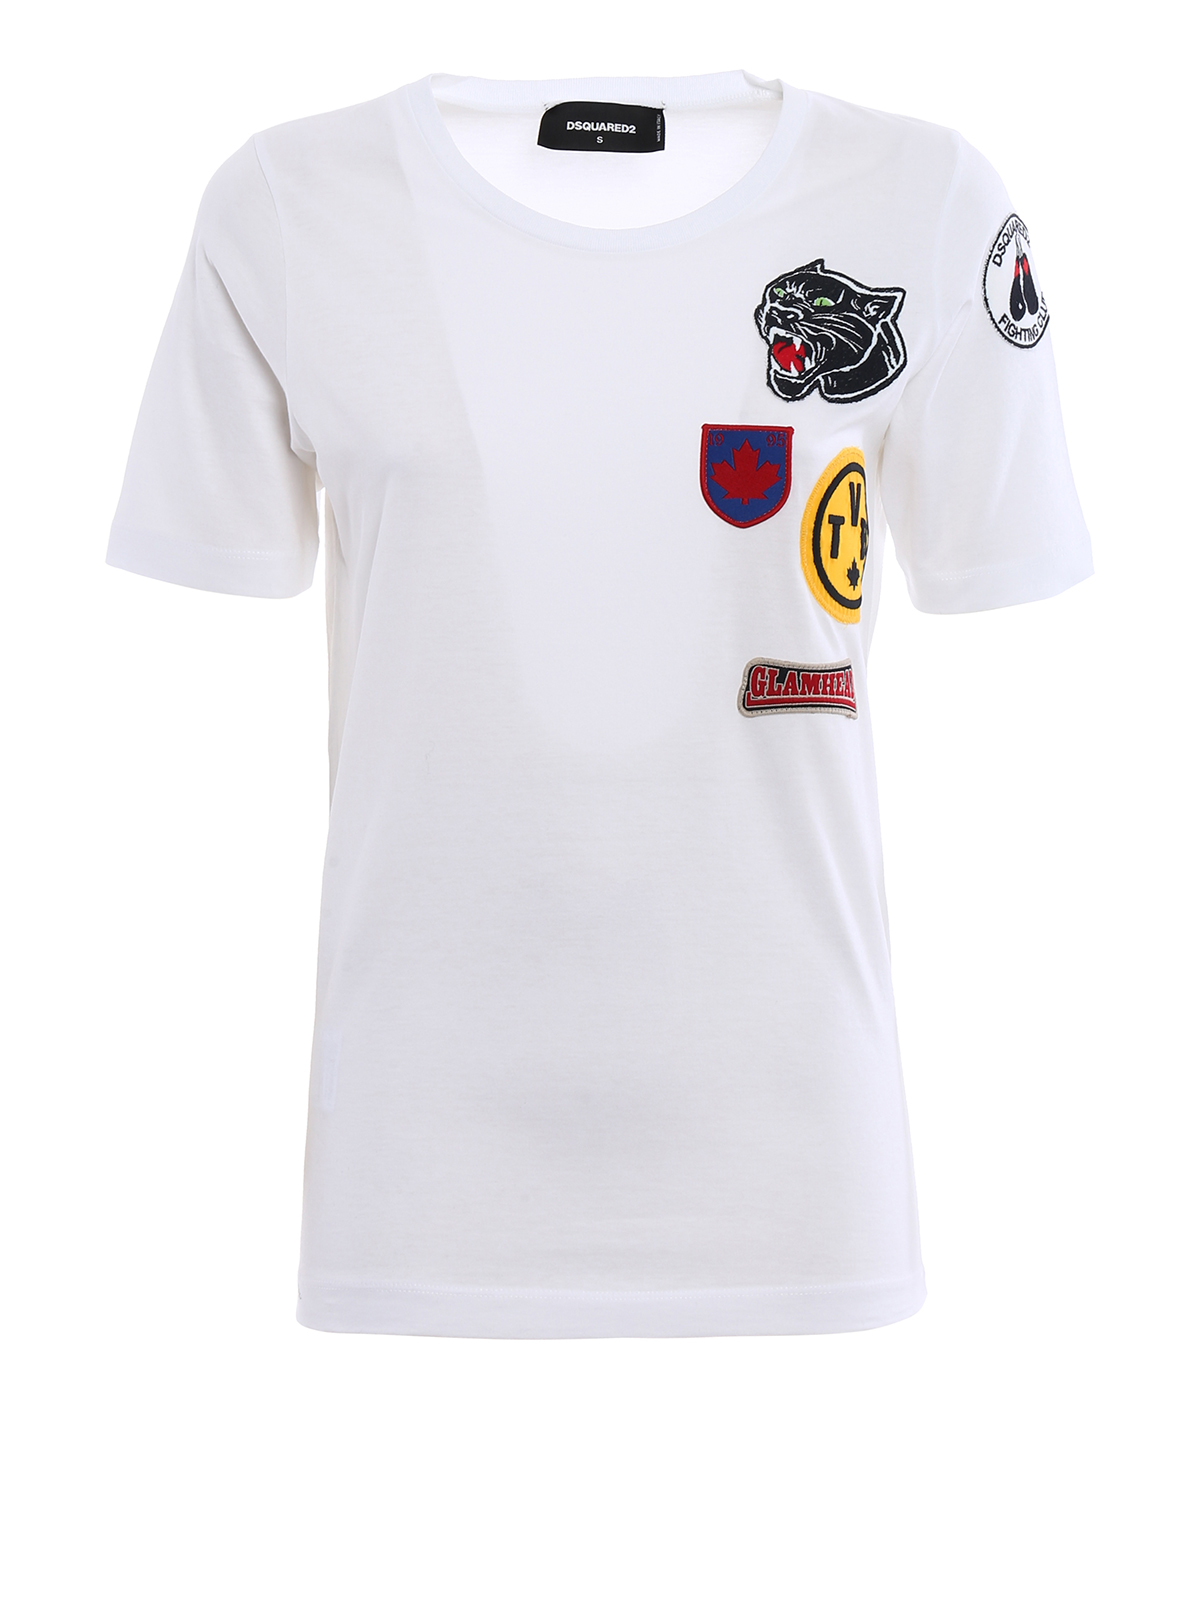 T Shirts With Patches - AntonioMaginnis Blog